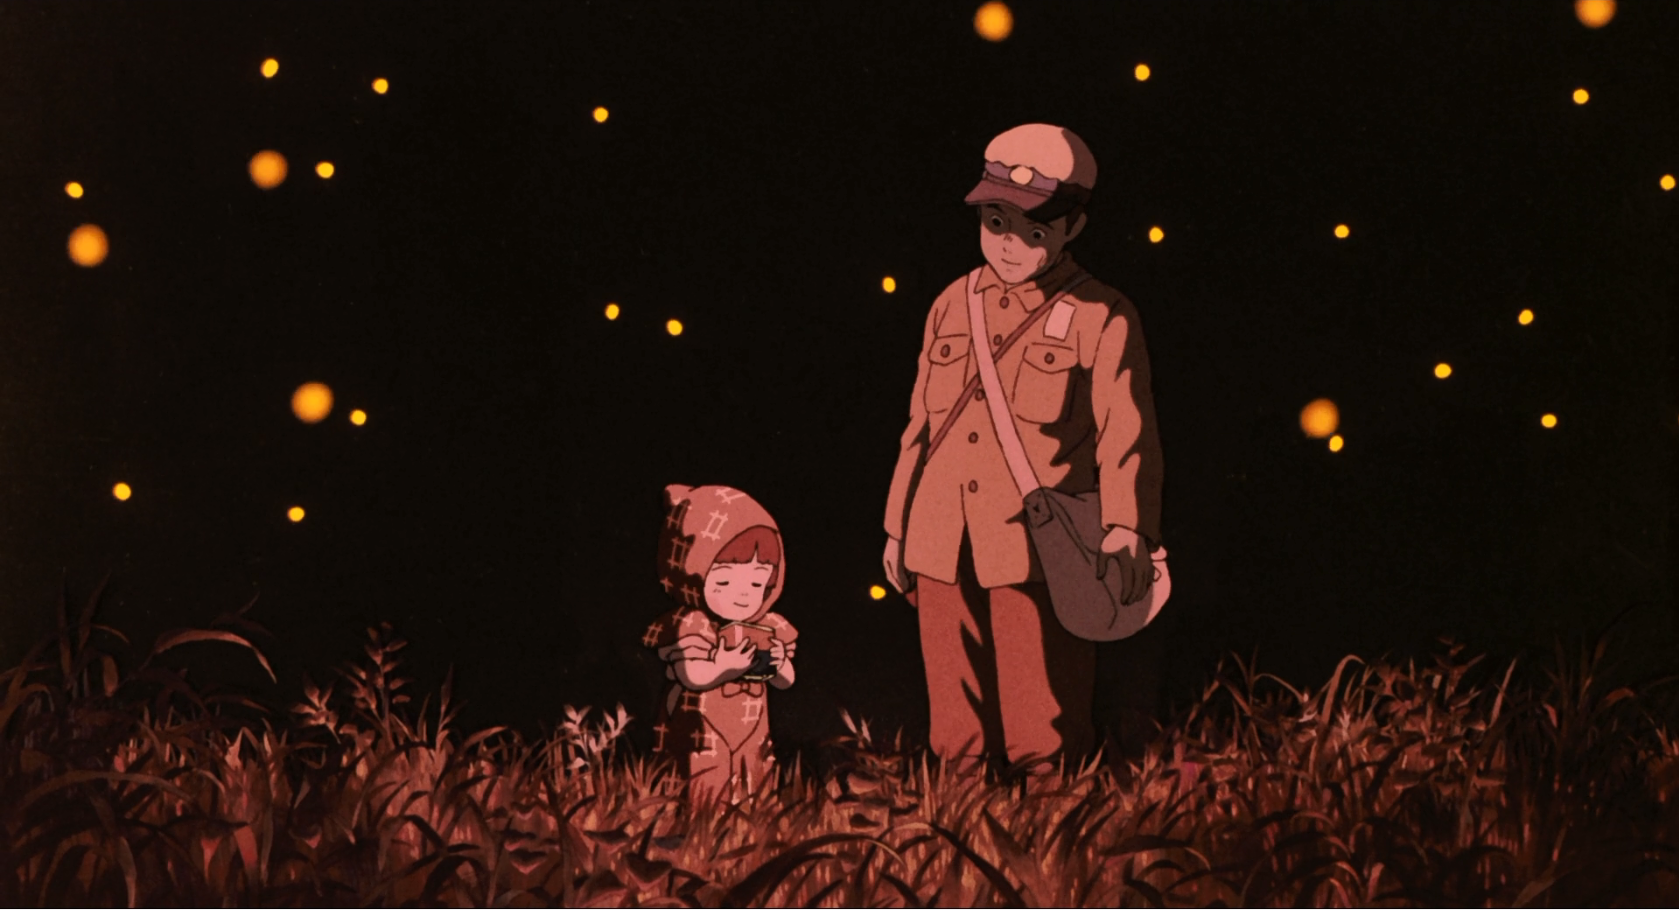 36. Grave of the Fireflies